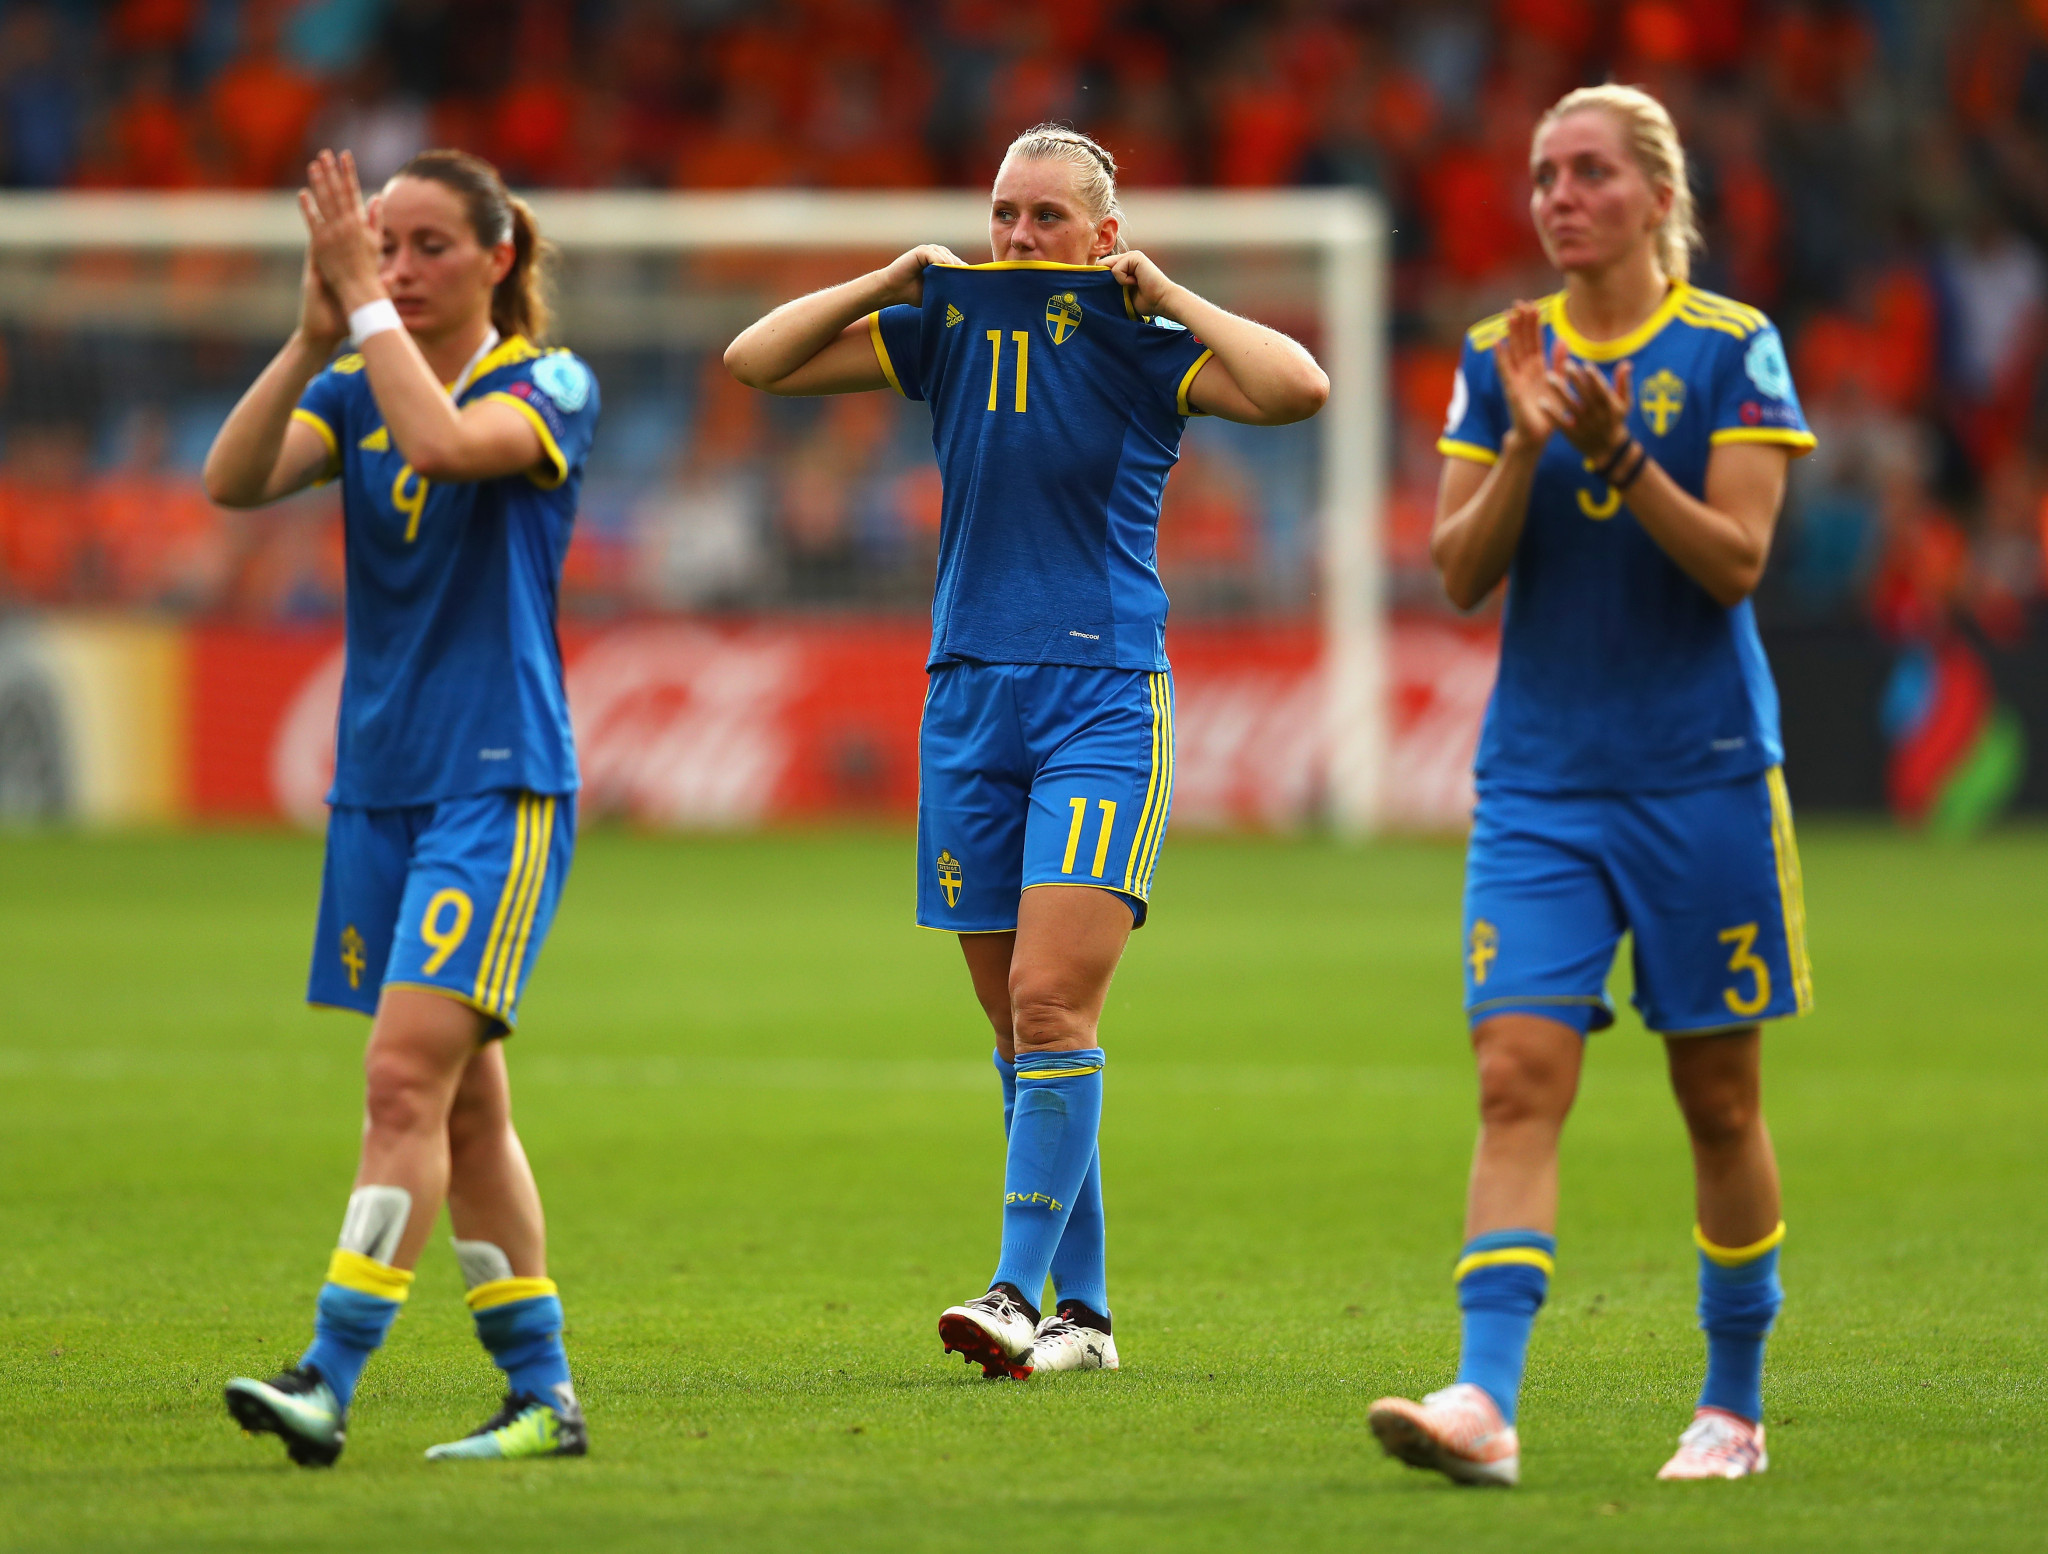 Swedish Football Association agree new contracts for women's team